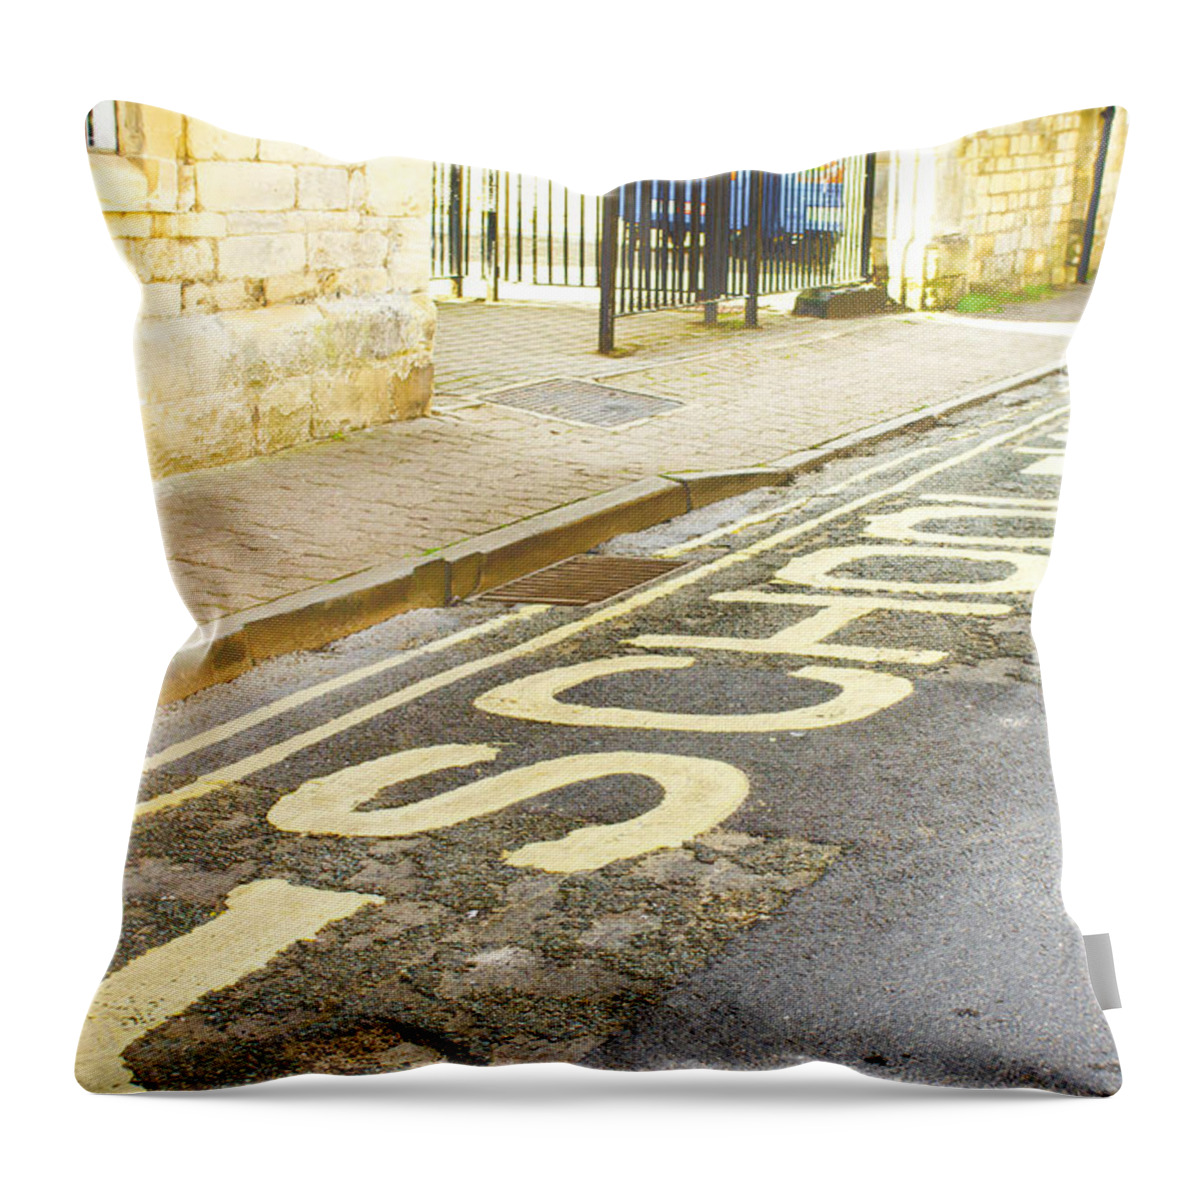 Abstract Throw Pillow featuring the photograph School entrance by Tom Gowanlock